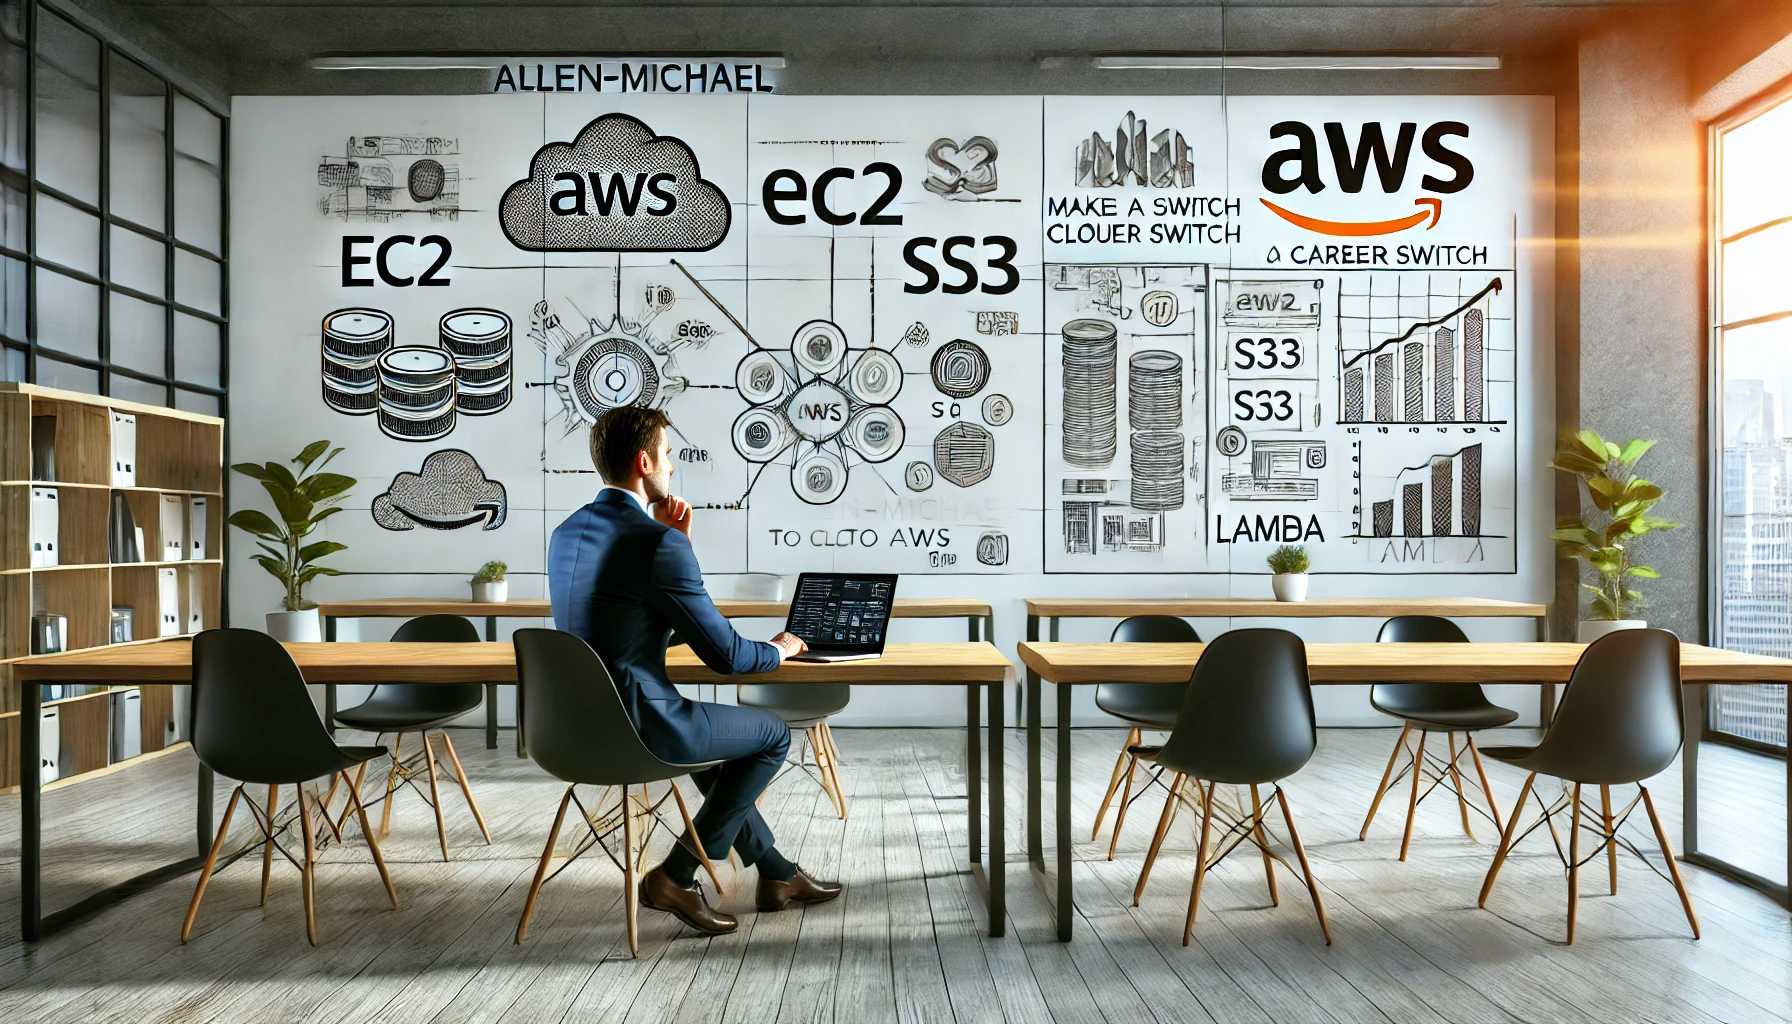 How Allen-Michael Made a Career Switch to AWS with Tech Skills